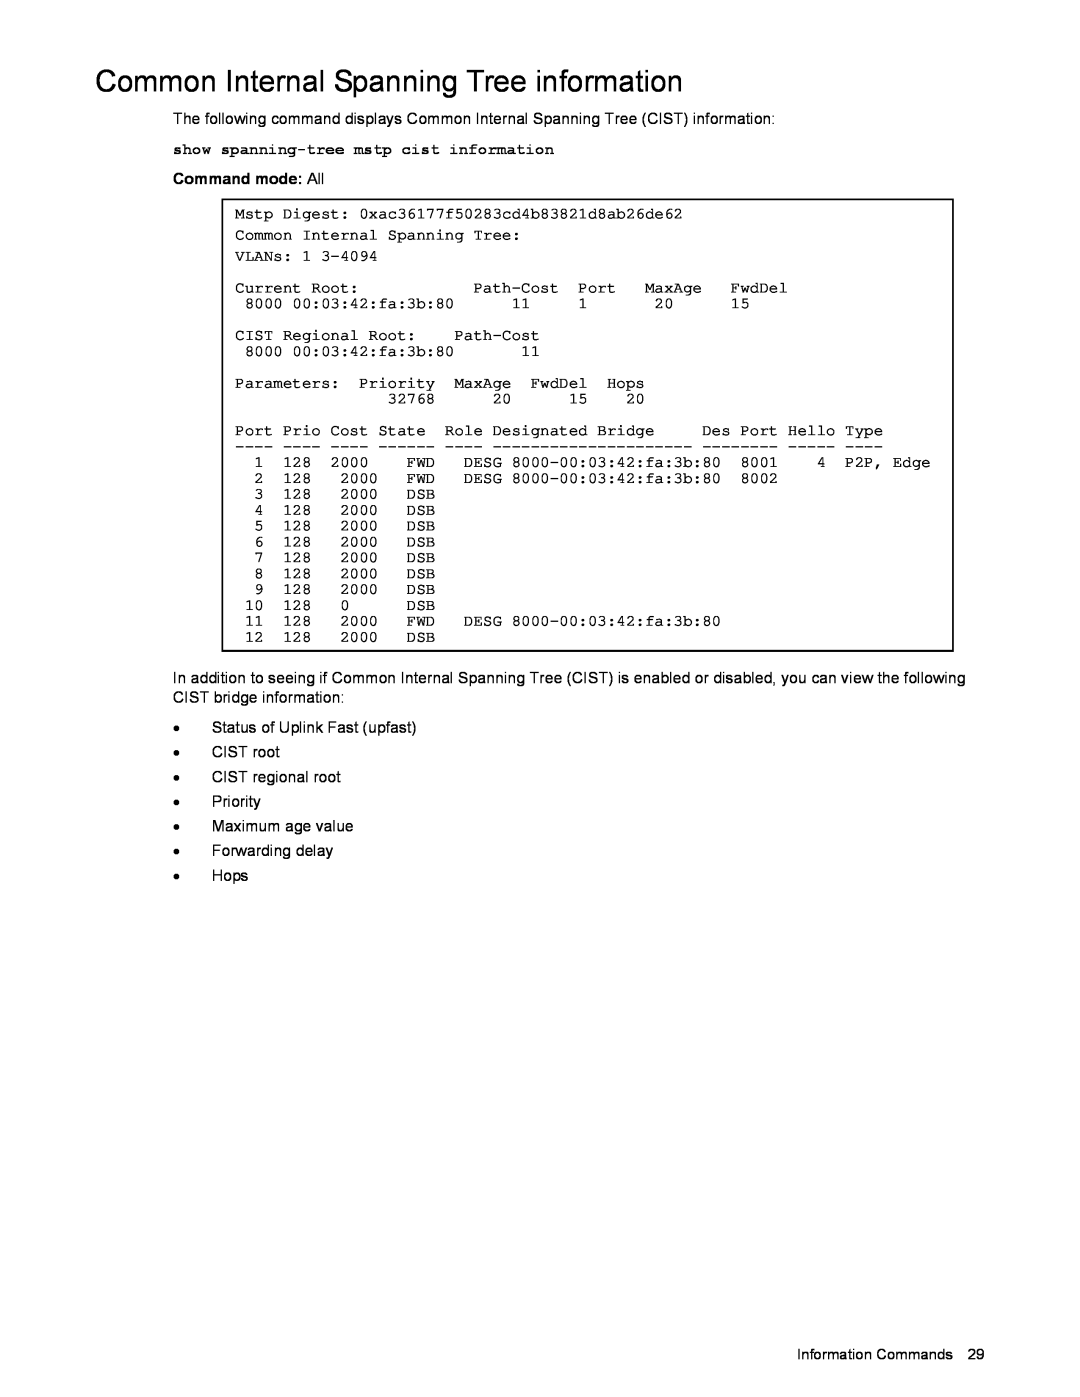 NEC N8406-022 manual Common Internal Spanning Tree information, Command mode: All 